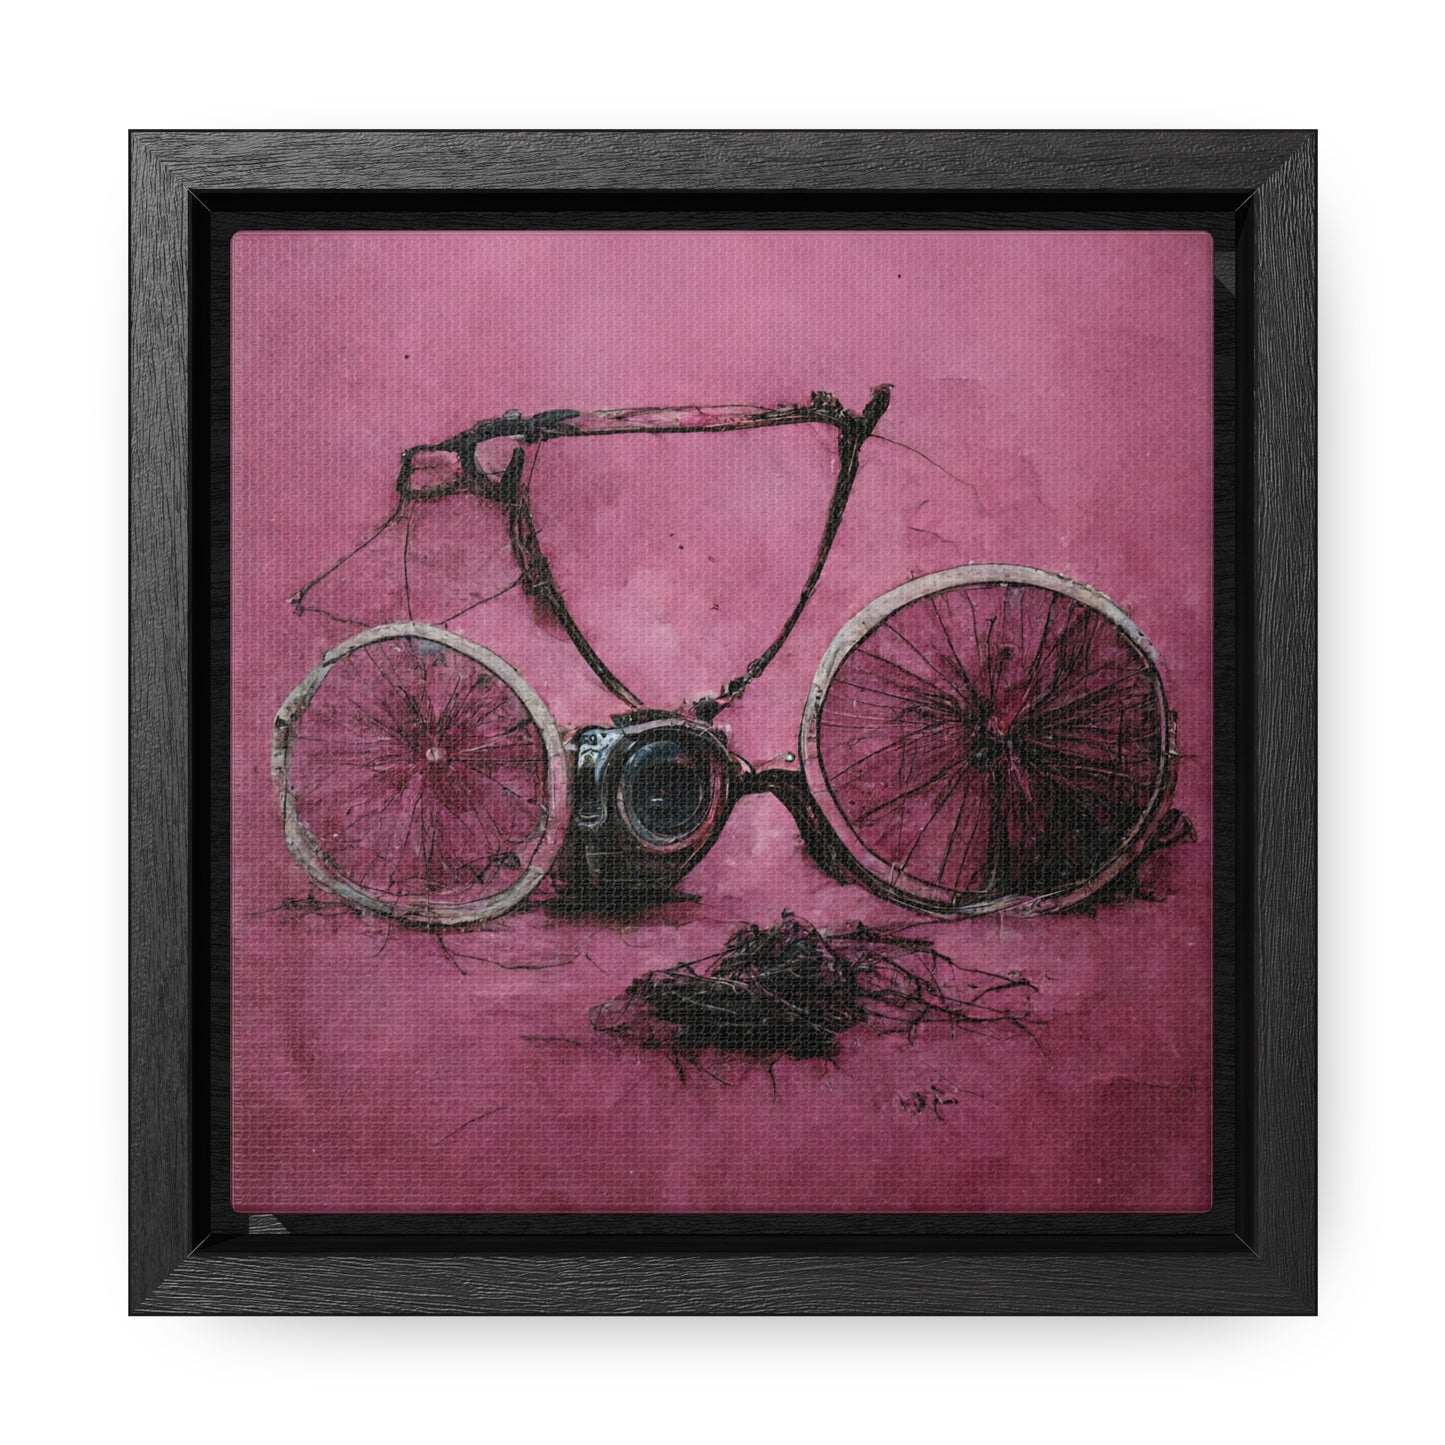 Bicycle 10, Valentinii, Gallery Canvas Wraps, Square Frame